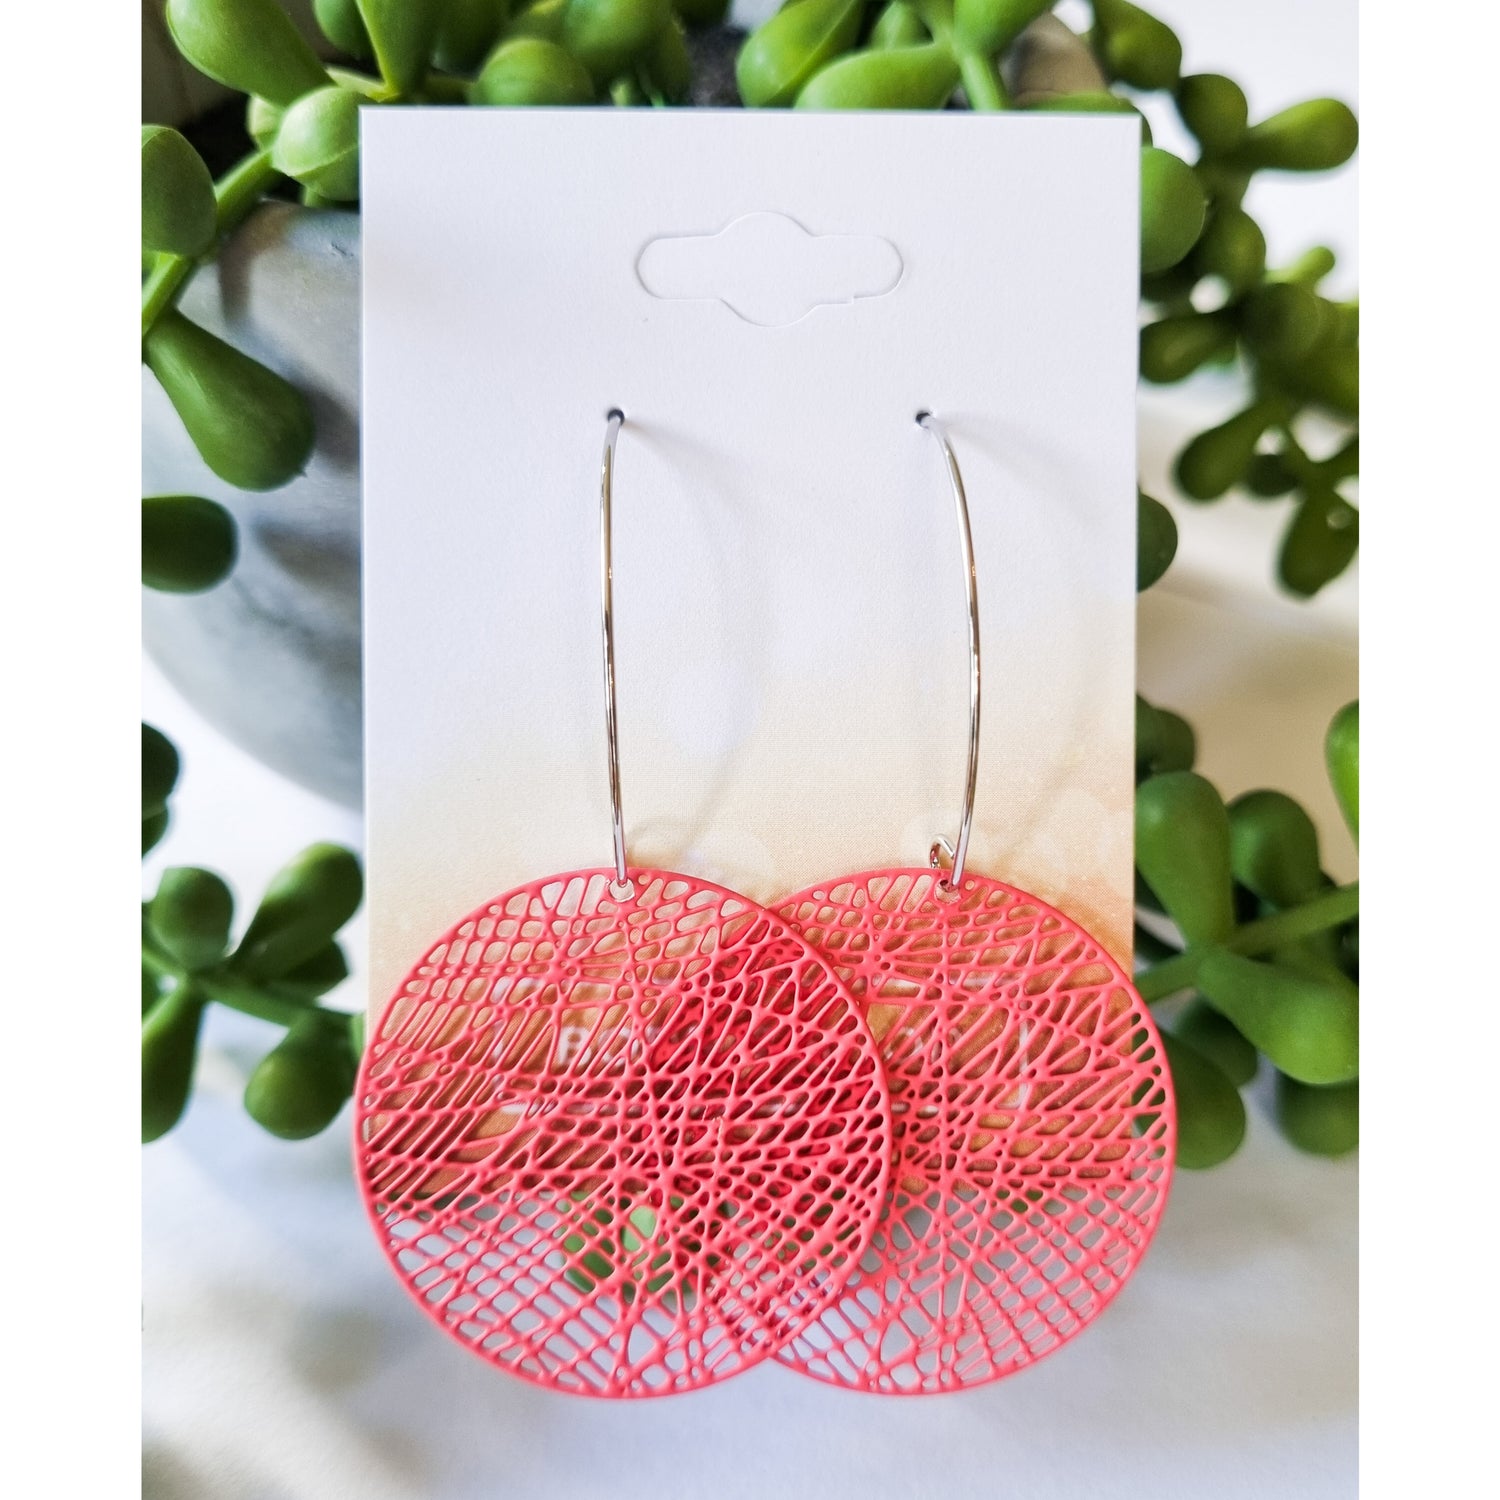 Paris Contemporary Chic Earrings- CHATCORSIL